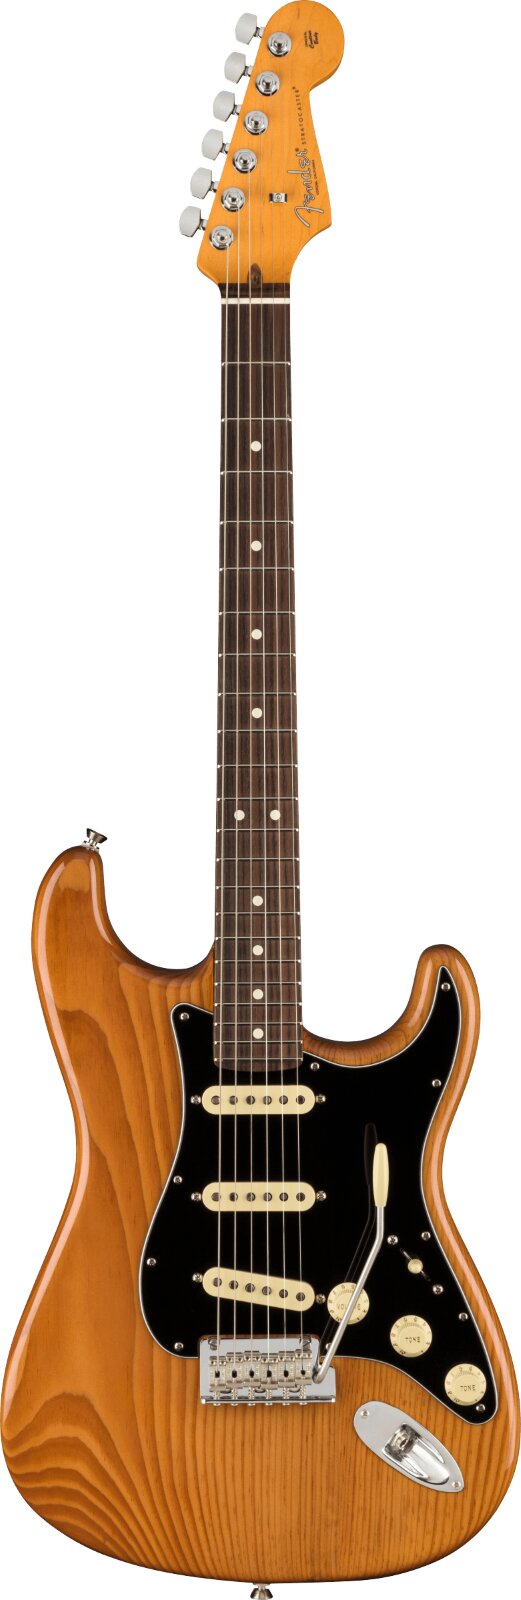 Fender American Professional II Stratocaster Rosewood Griffbrett Roasted Pine : photo 1